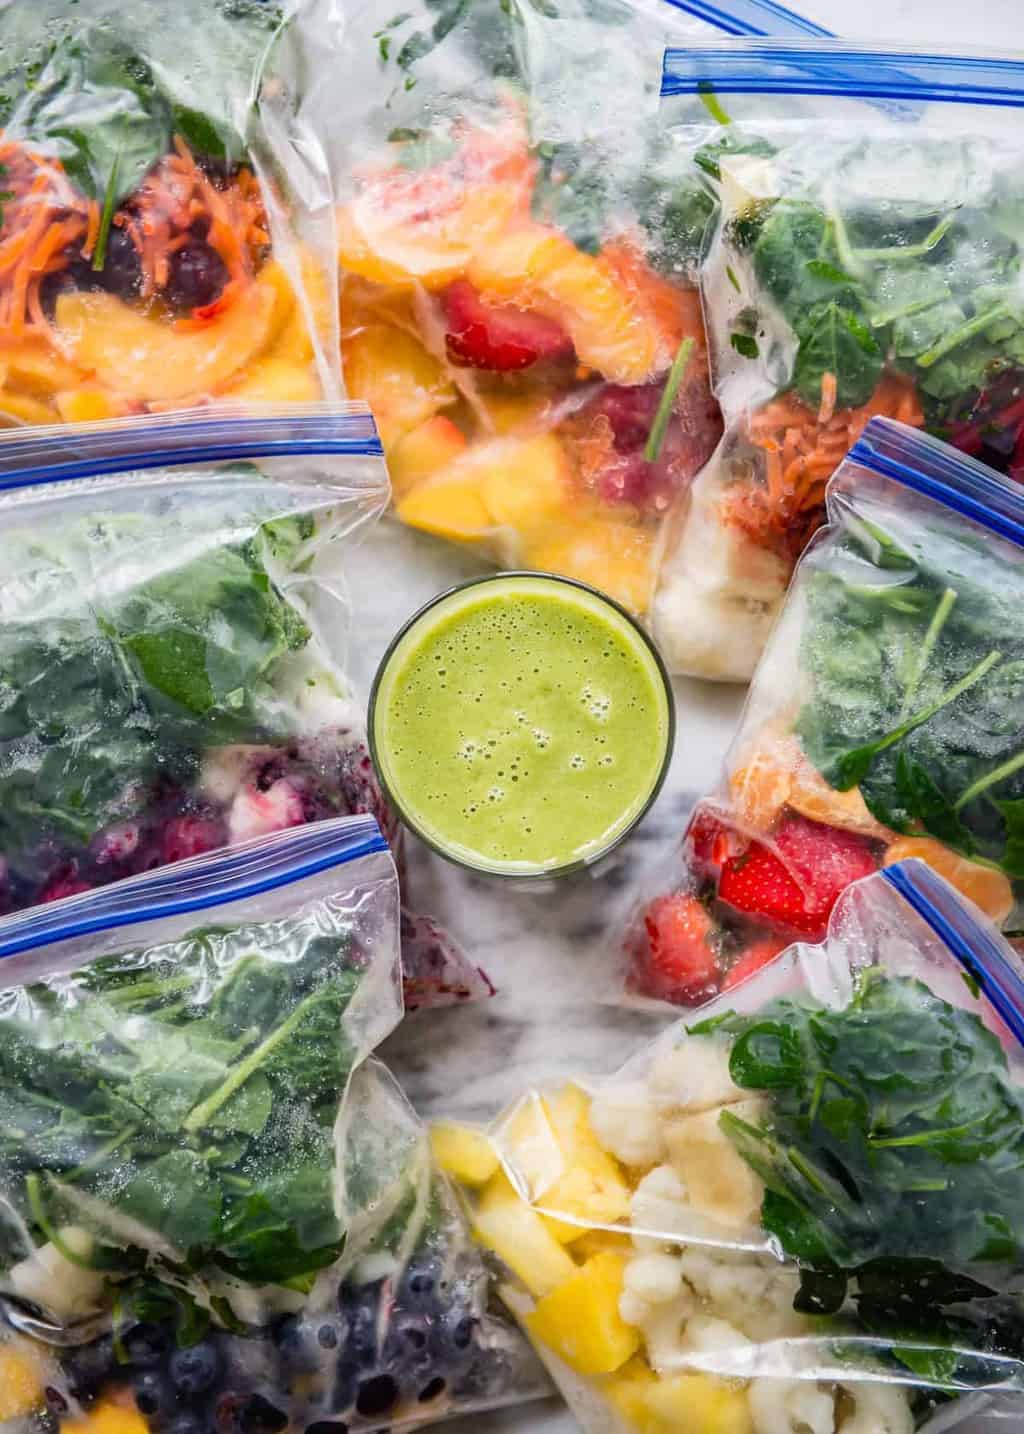 3 Ways You Can Meal Prep Smoothies